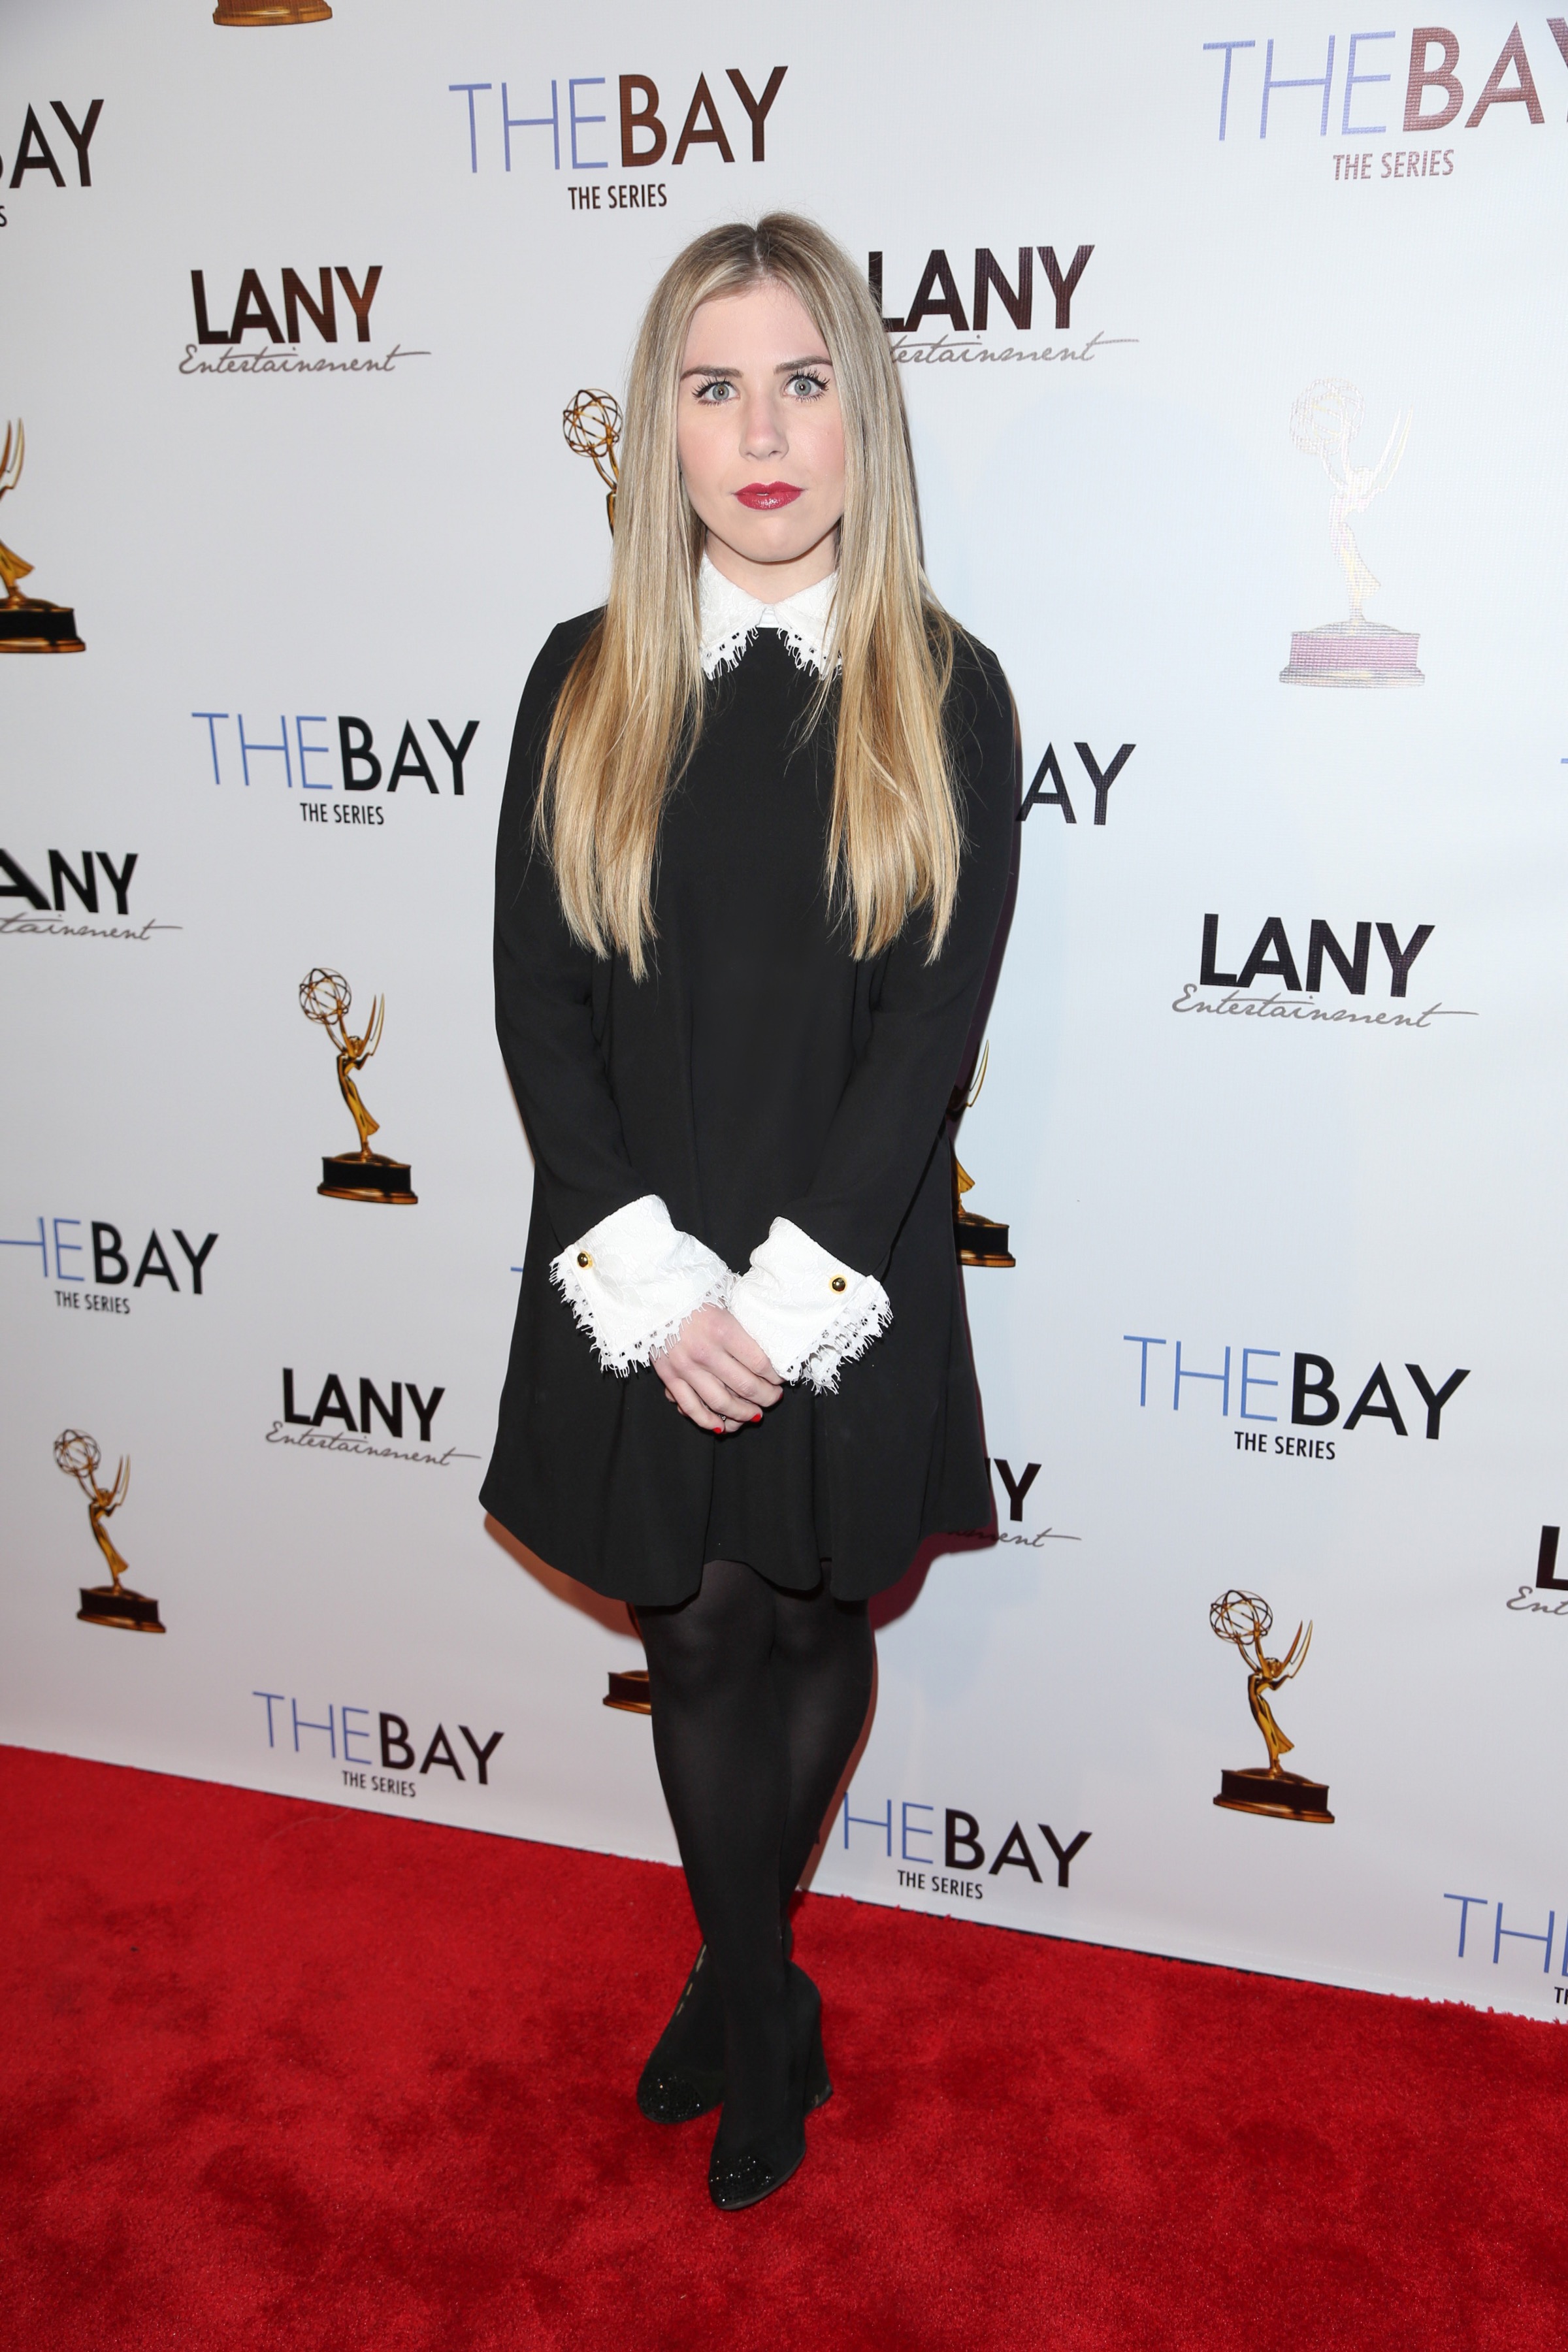 Sainty Nelsen at an Emmy event honoring, The Bay the Series.